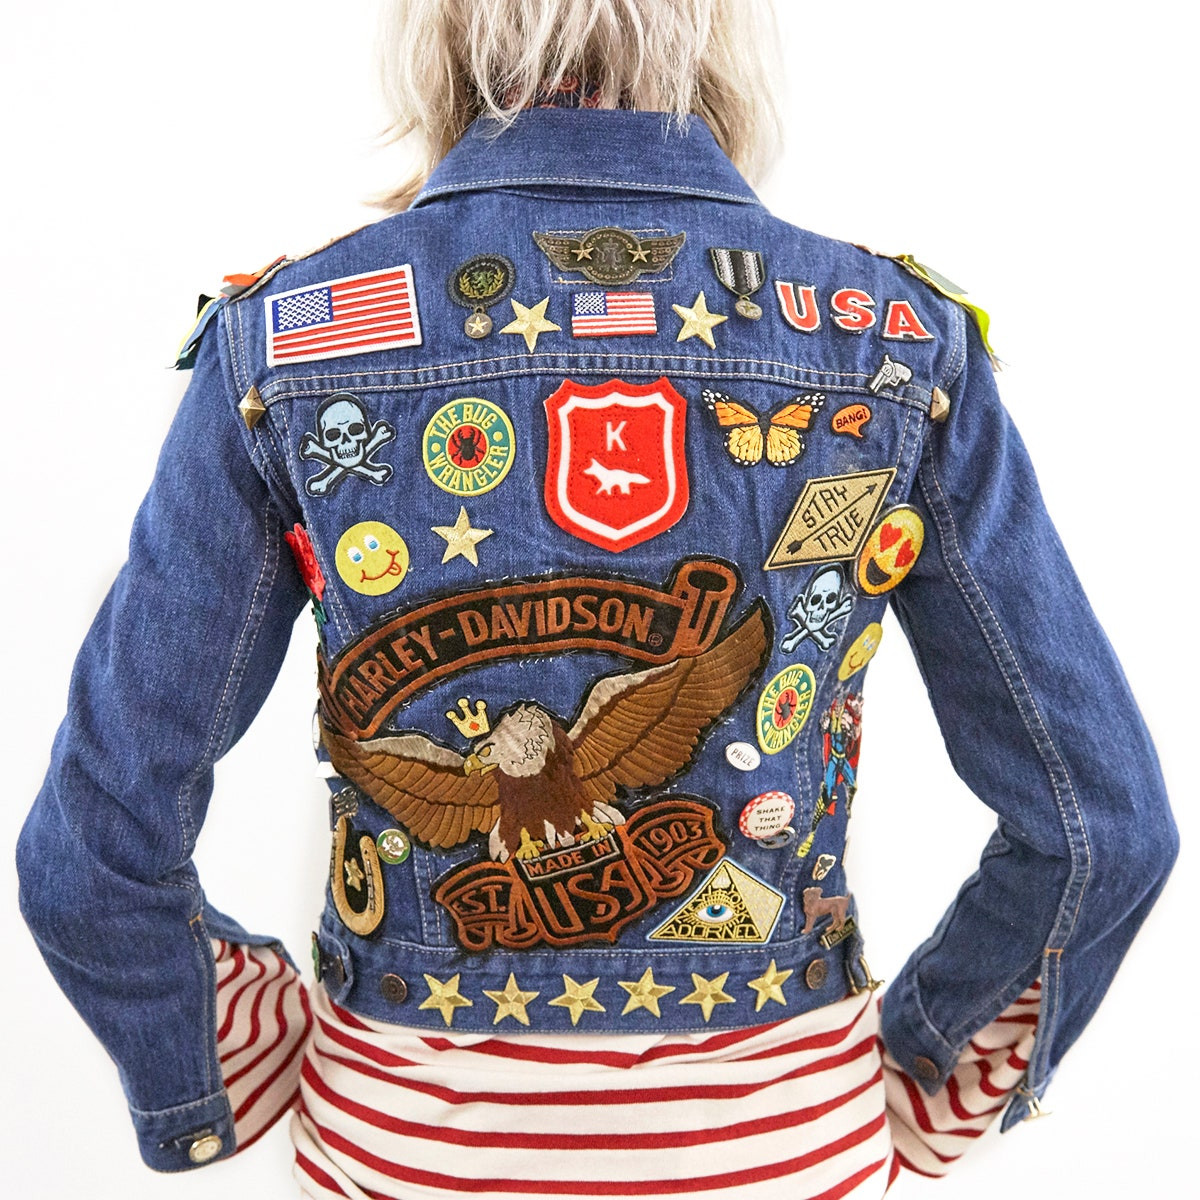 Pins On Denim Jacket
 The Best Patches and Pins for Fall 2014 Denim Vogue